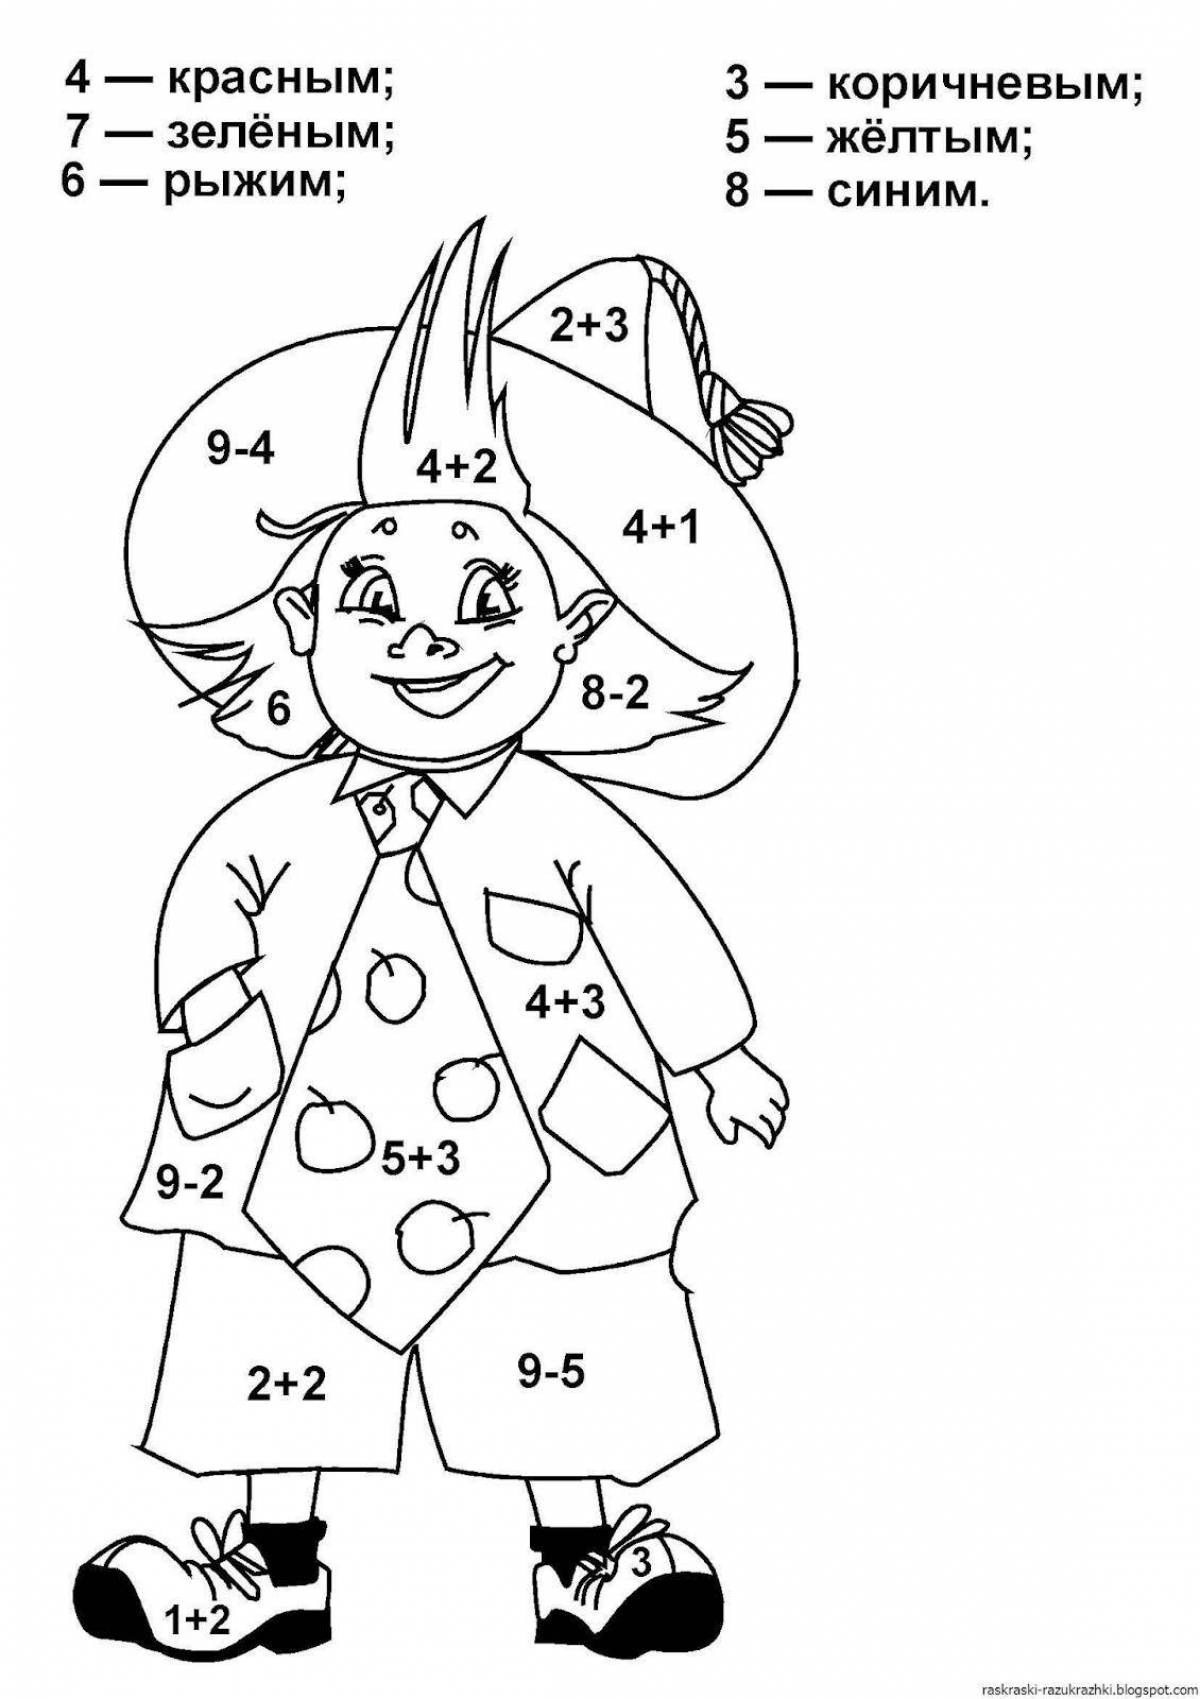 Colorful math coloring book with examples for preschoolers